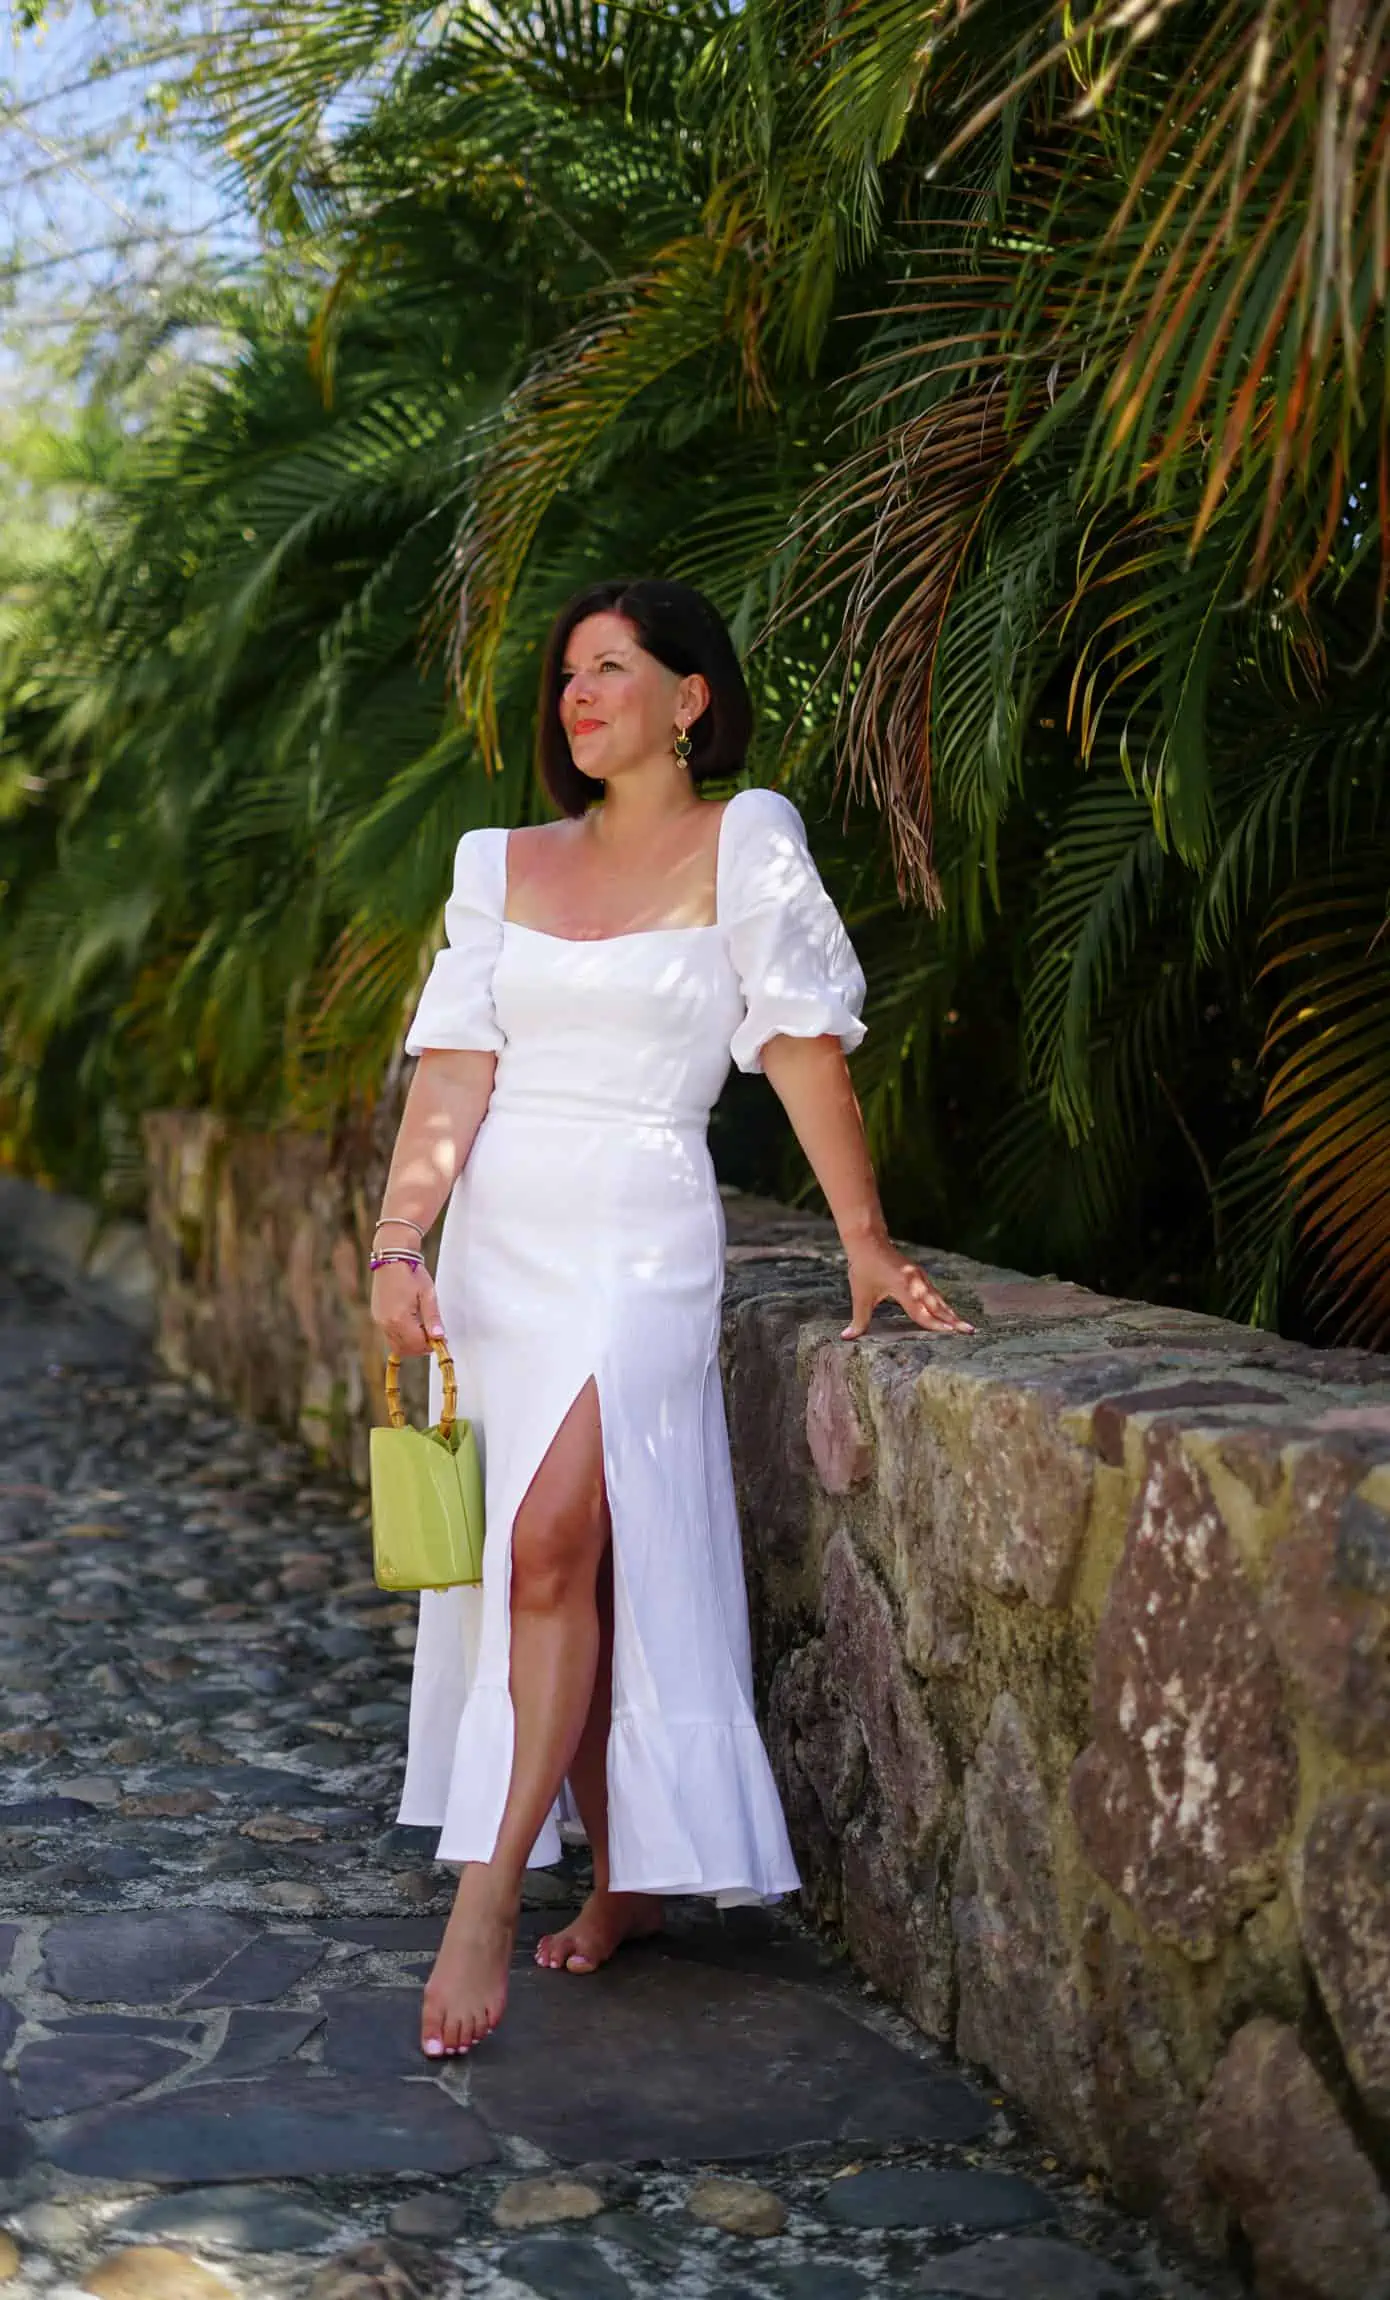 Reformation white linen dress with the Cult Gaia Zenda bag. Cute Cabo outfits for vacation